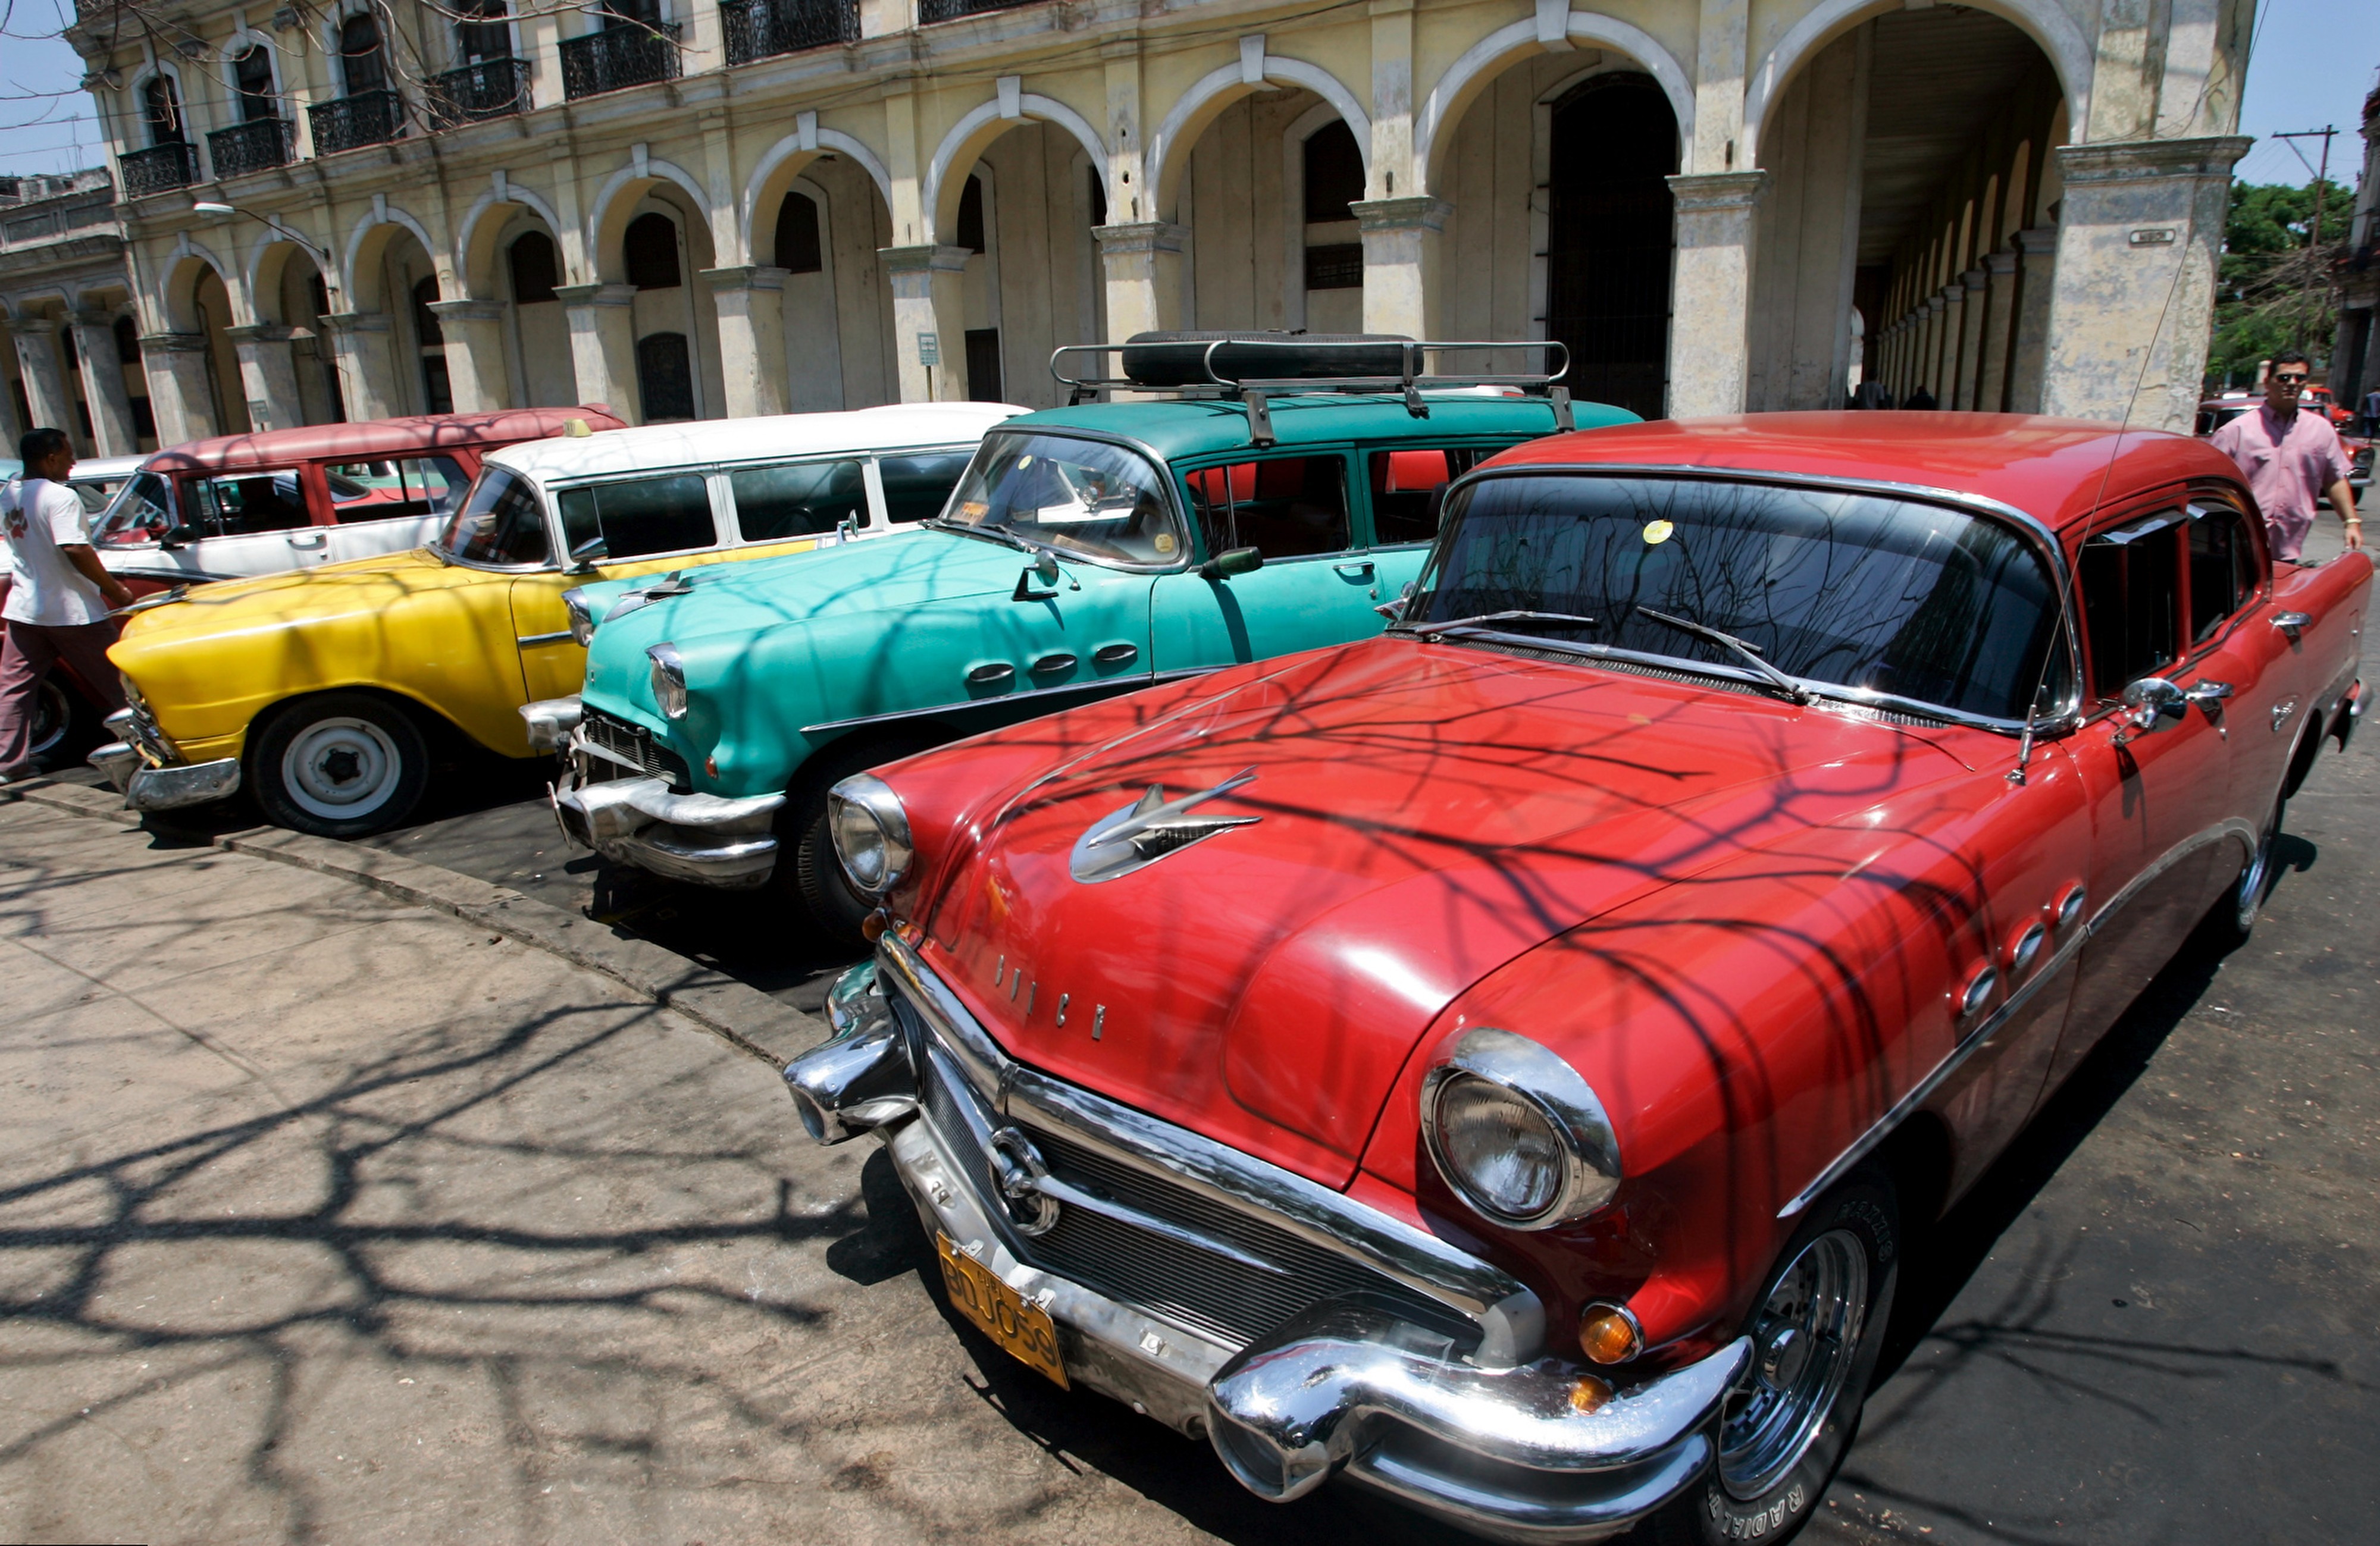 Over 200 global hotel chains, including Marriott, Hilton, Wyndham, Hyatt, and IHG, are eyeing out Cuba as the next big destination for luxury tourism